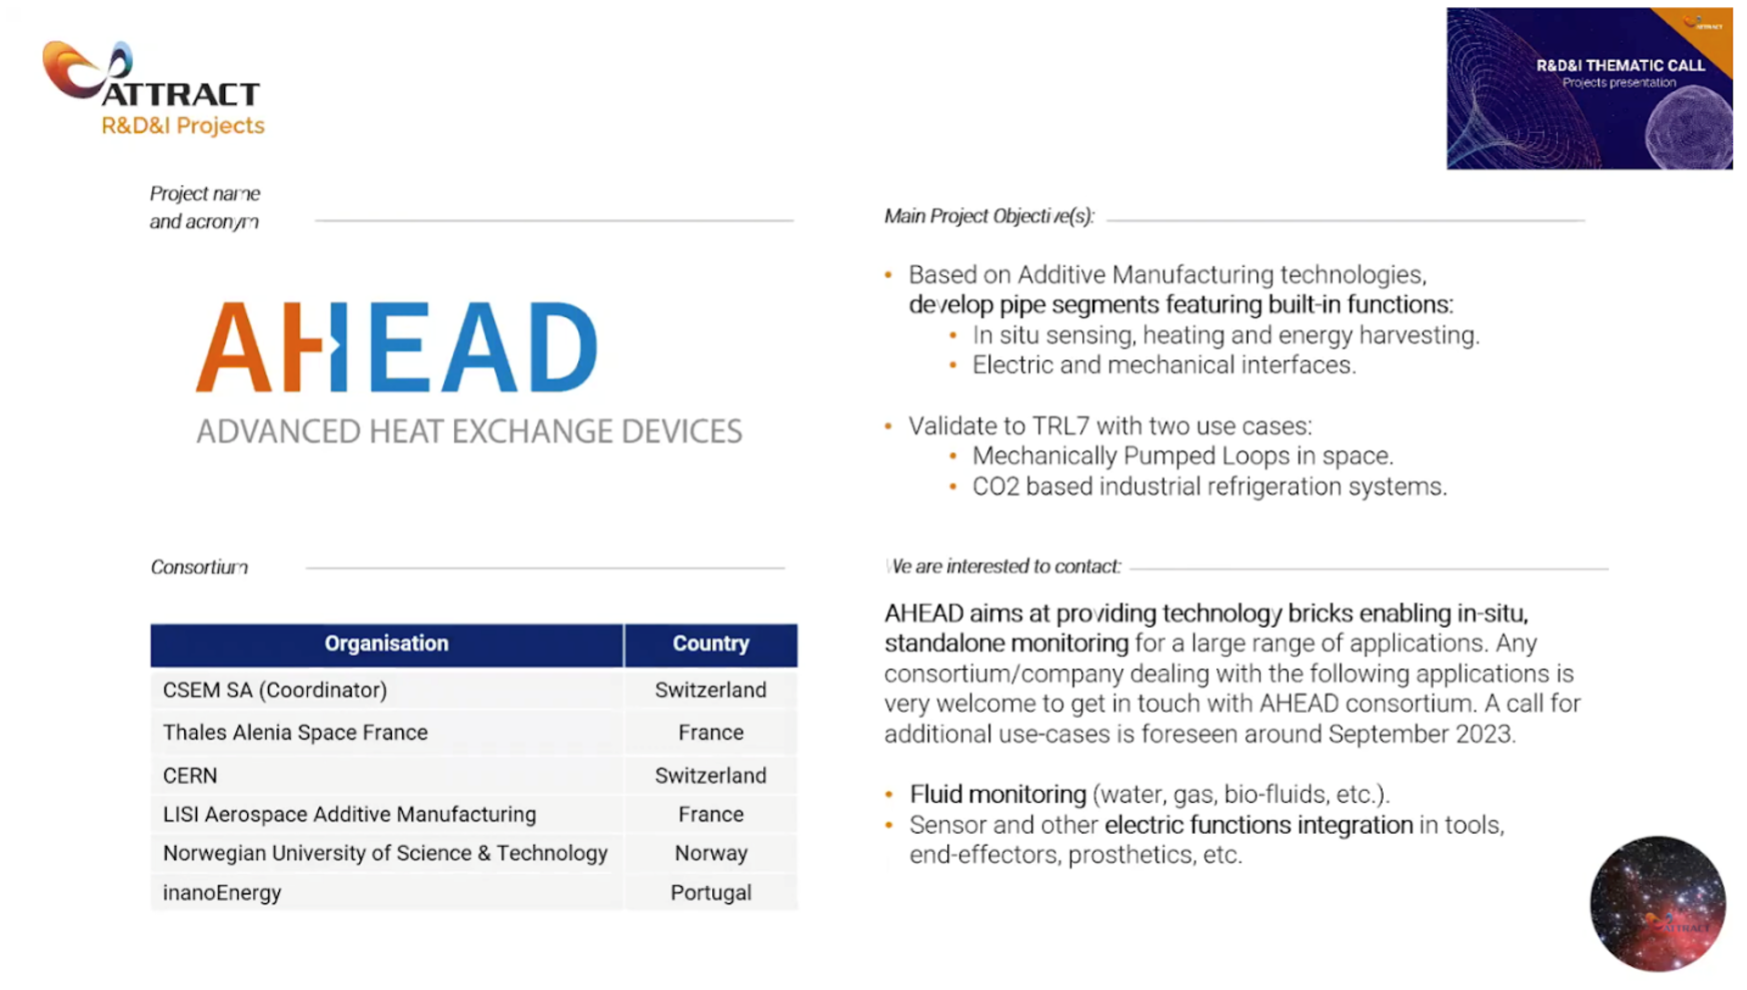 Advanced Heat Exchange Devices (AHEAD) is one of the R&D&I funded projects coordinated by the Swiss research and development centre (CSEM) in which CERN is part of the consortia. (Image: AHEAD)